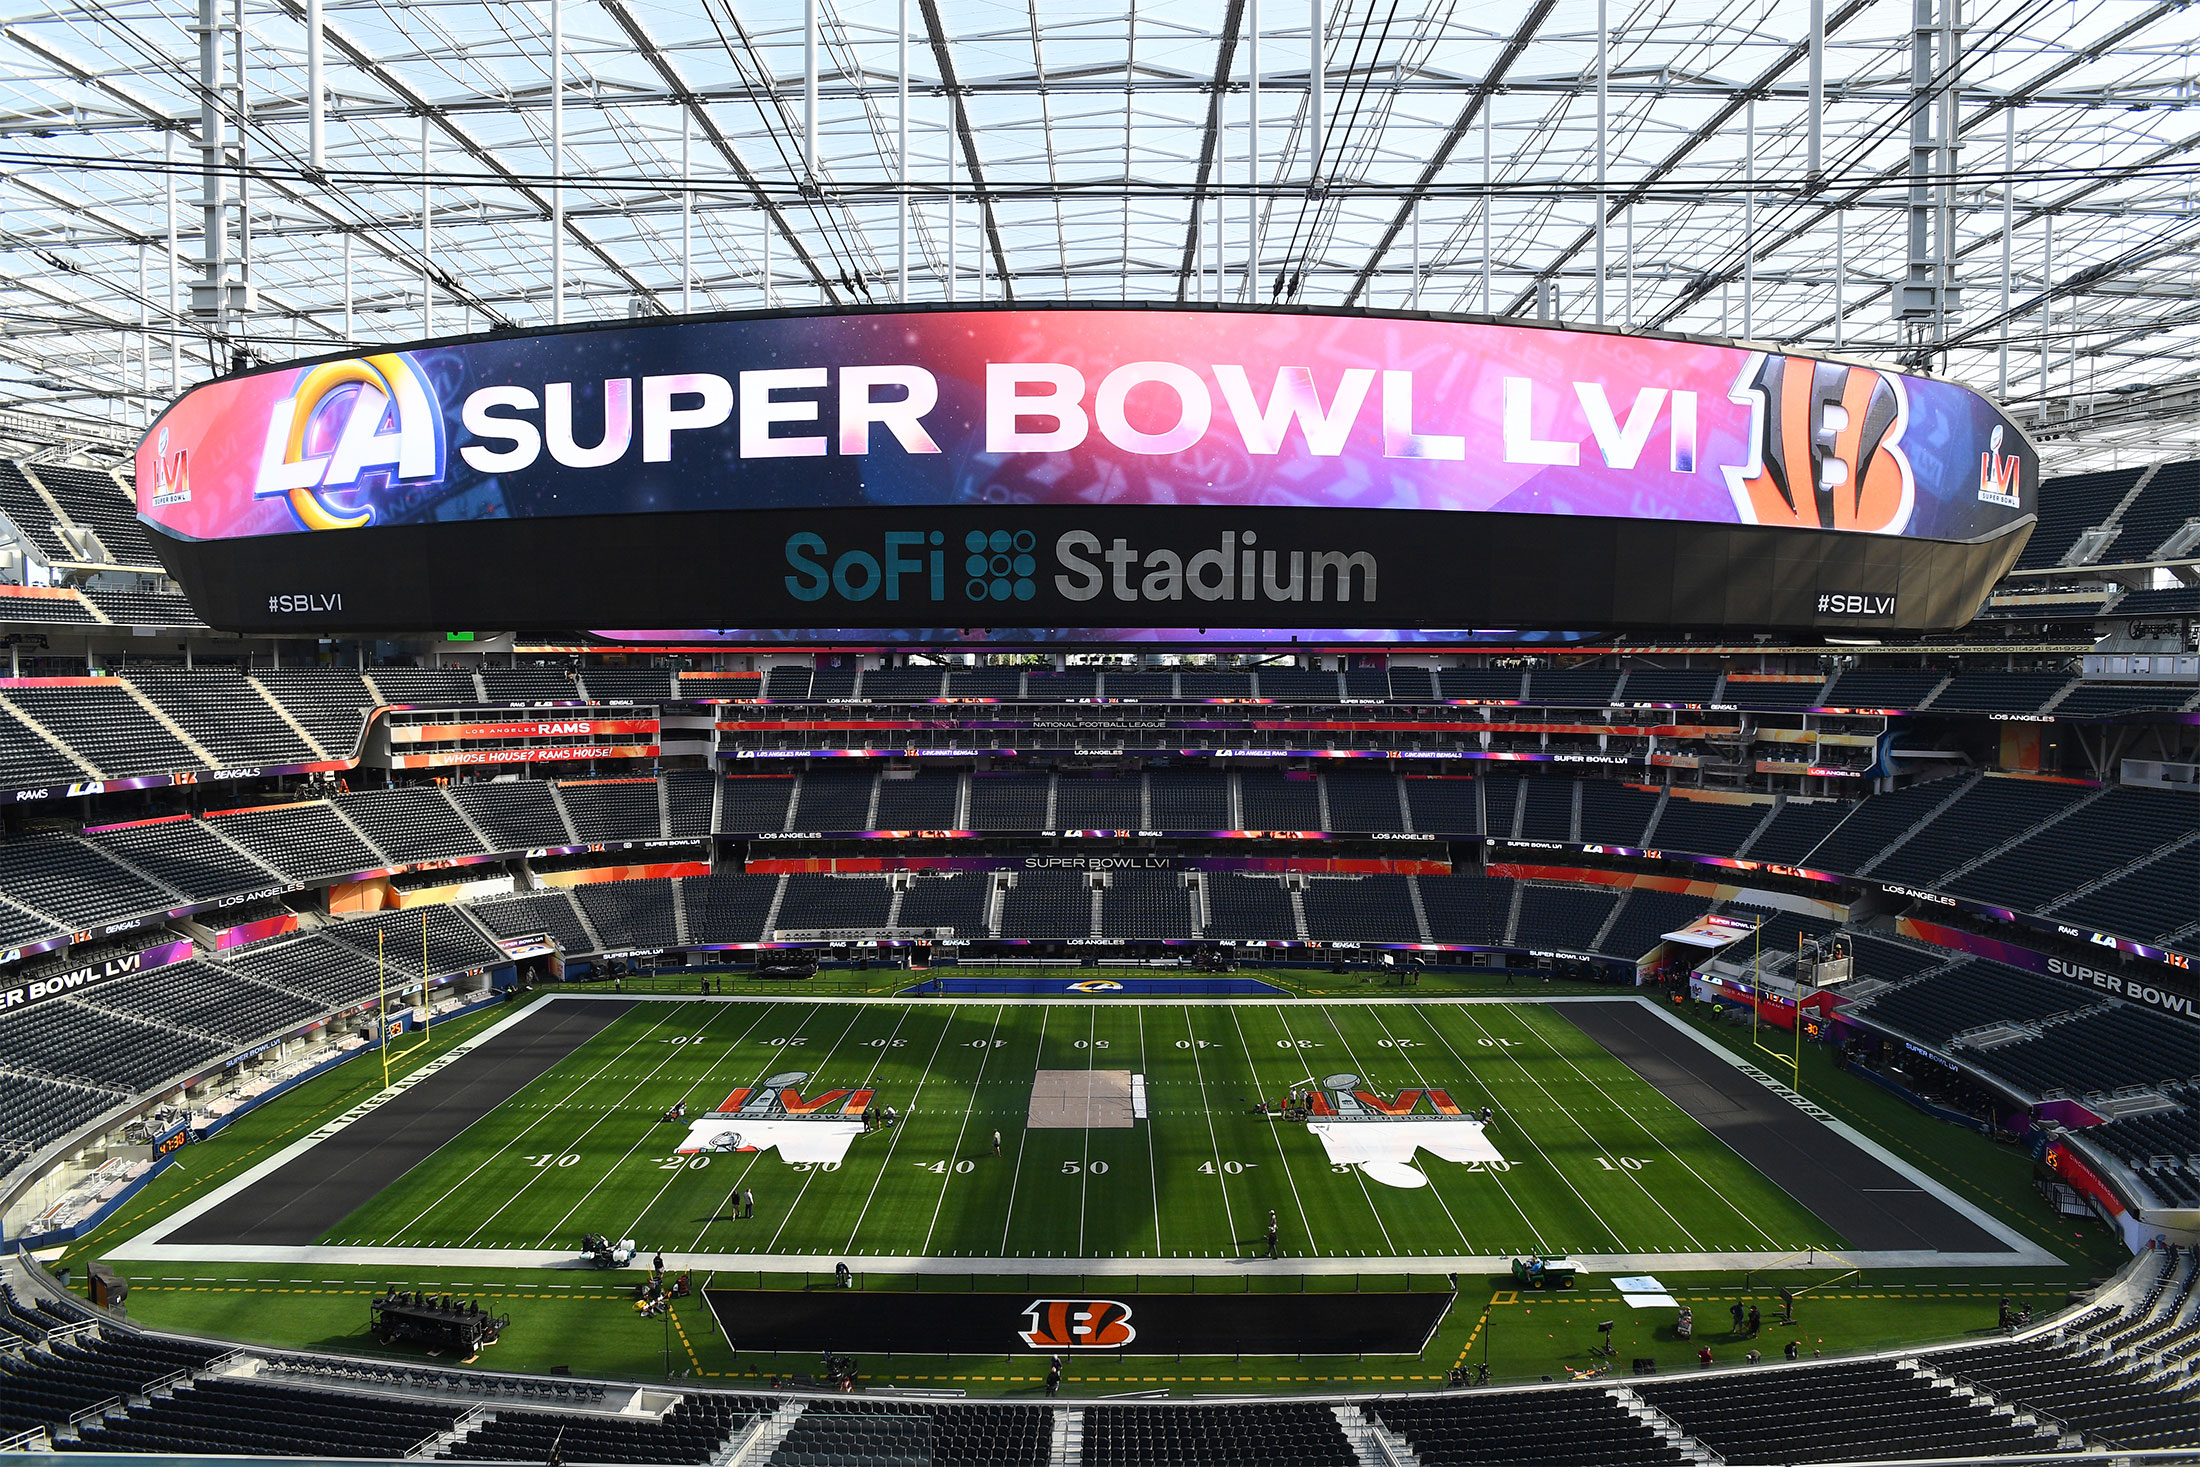 most expensive seat at the super bowl